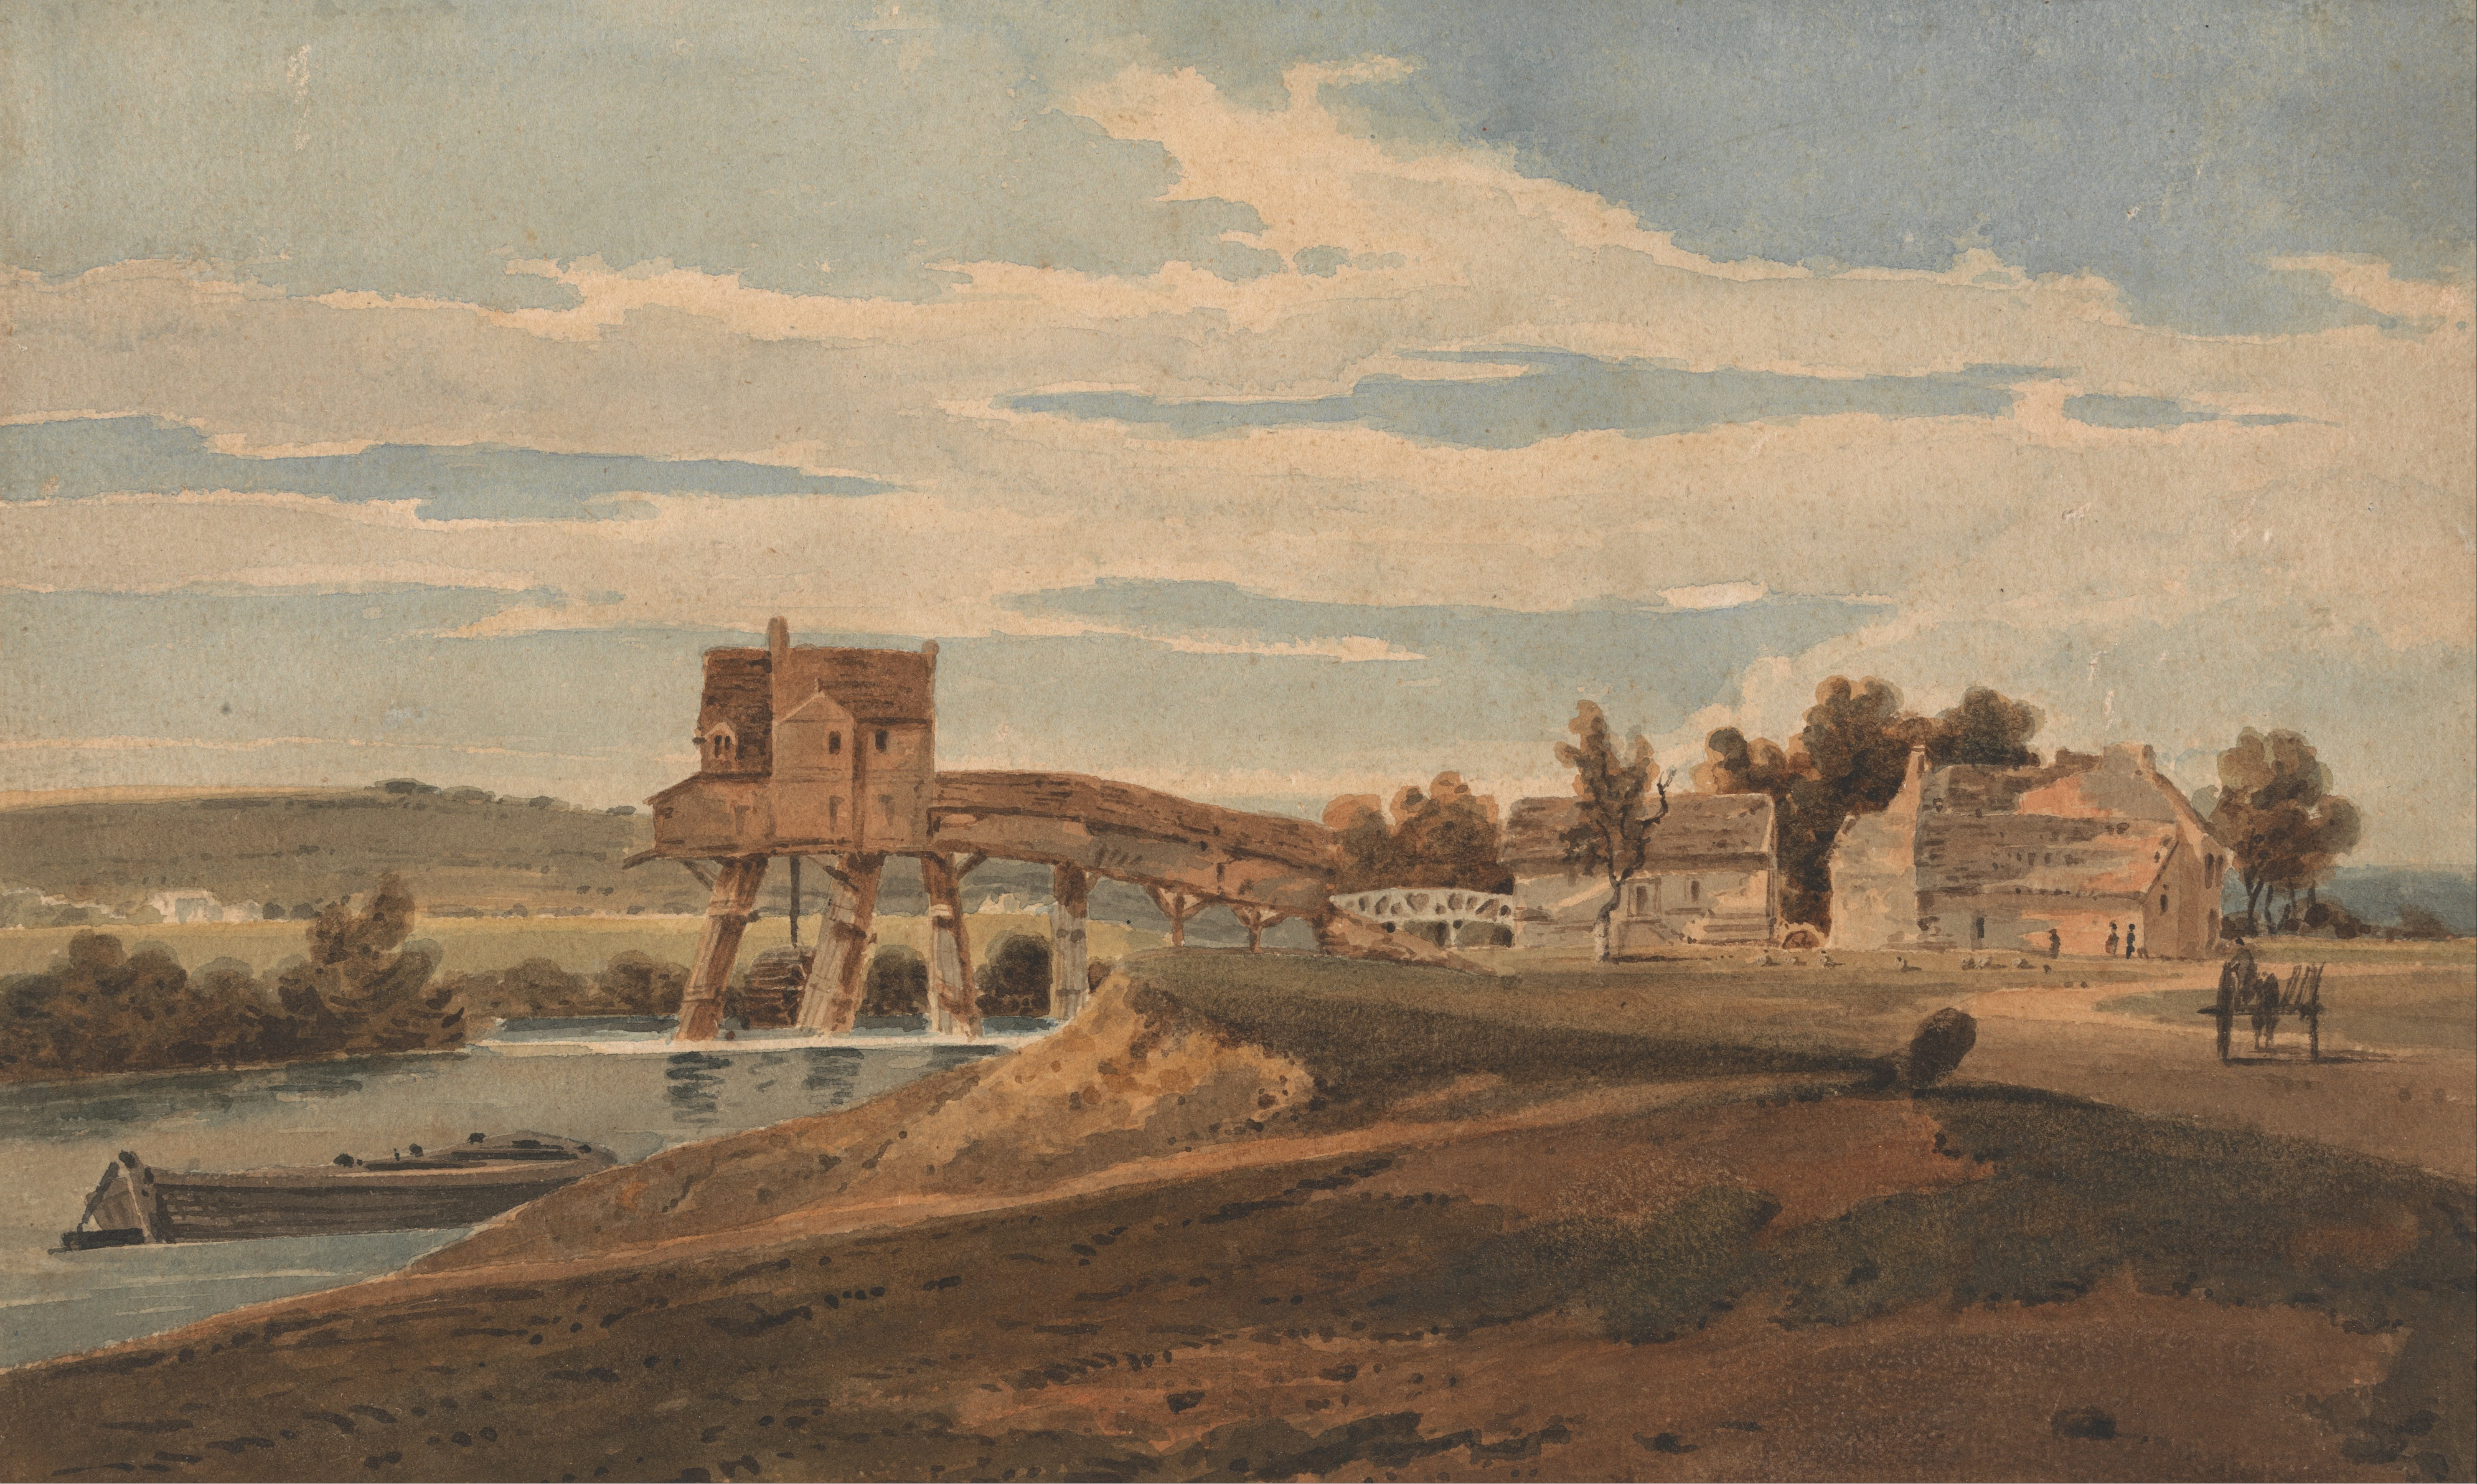 girtin-thomas-1802-gravthe-water-mill-above-the-bridge-at-charenton-illustration-from-the-series-a-selection-of-twenty-of-the-most-picturesque-views-in-paris-and-its-environs